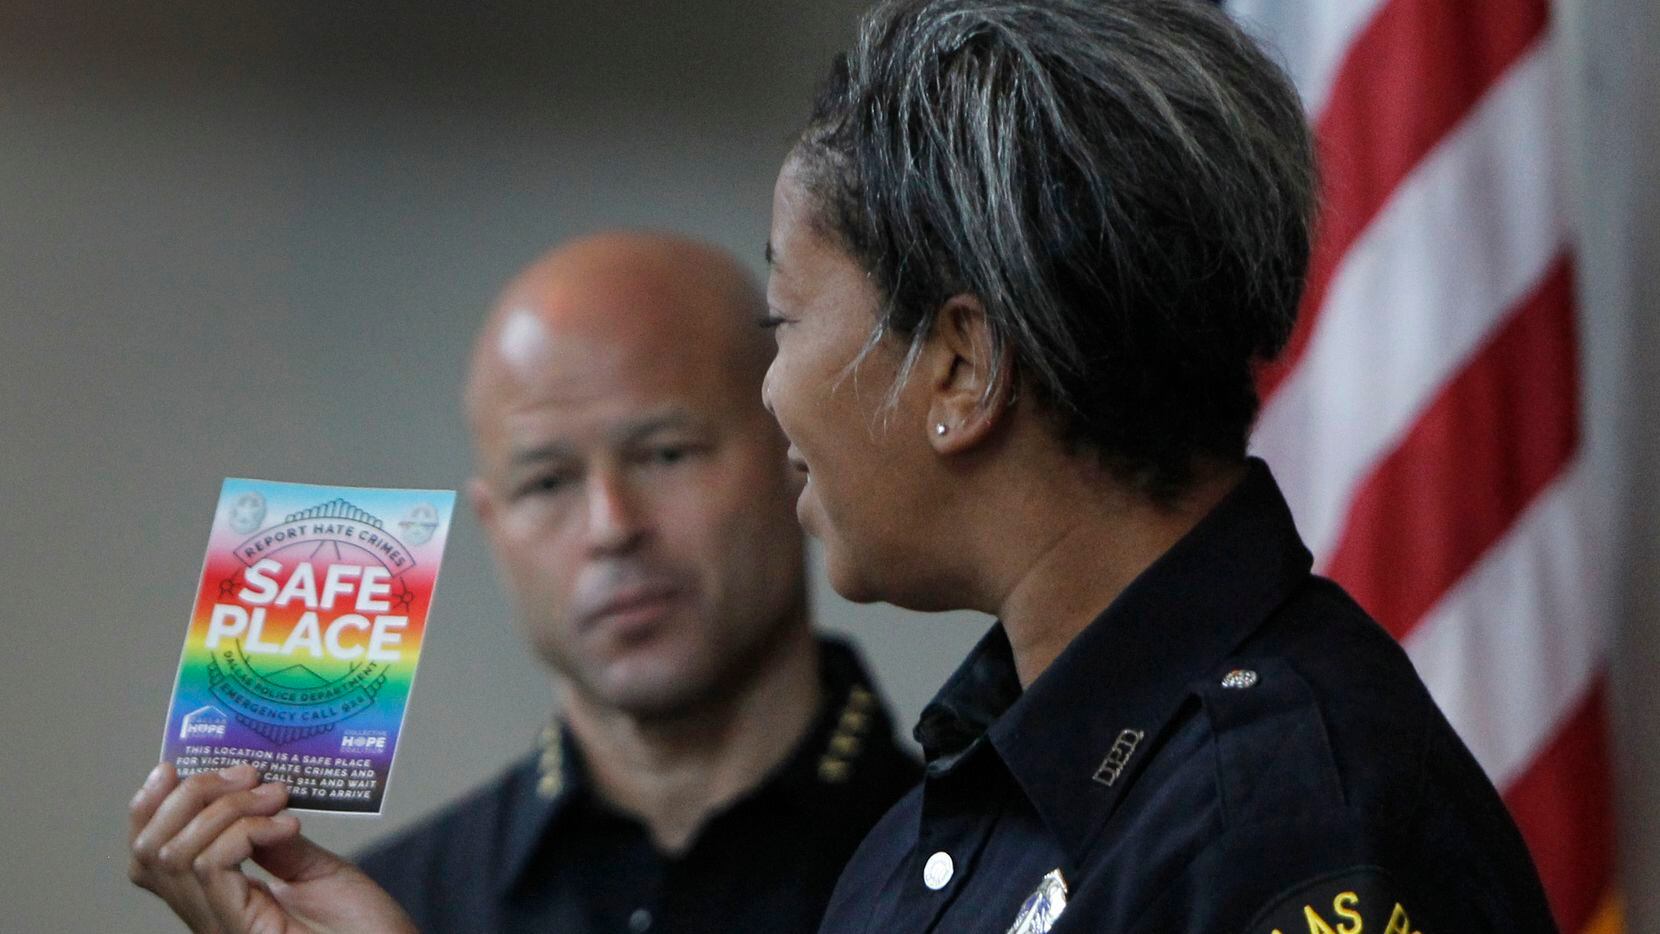 Dallas Police Department's new LGBTQ+ liaison, officer Megan Thomas displays the Safe Place business designations for potential targets of hate crimes until police can arrive in times of immediacy. Police Chief Eddie Garcia looks on in the background. The launch of the Safe Place Program was held at the Dallas police Department headquarters at 1400 Botham Jean Blvd. in Dallas on June 28, 2021. (Steve Hamm/ Special Contributor)